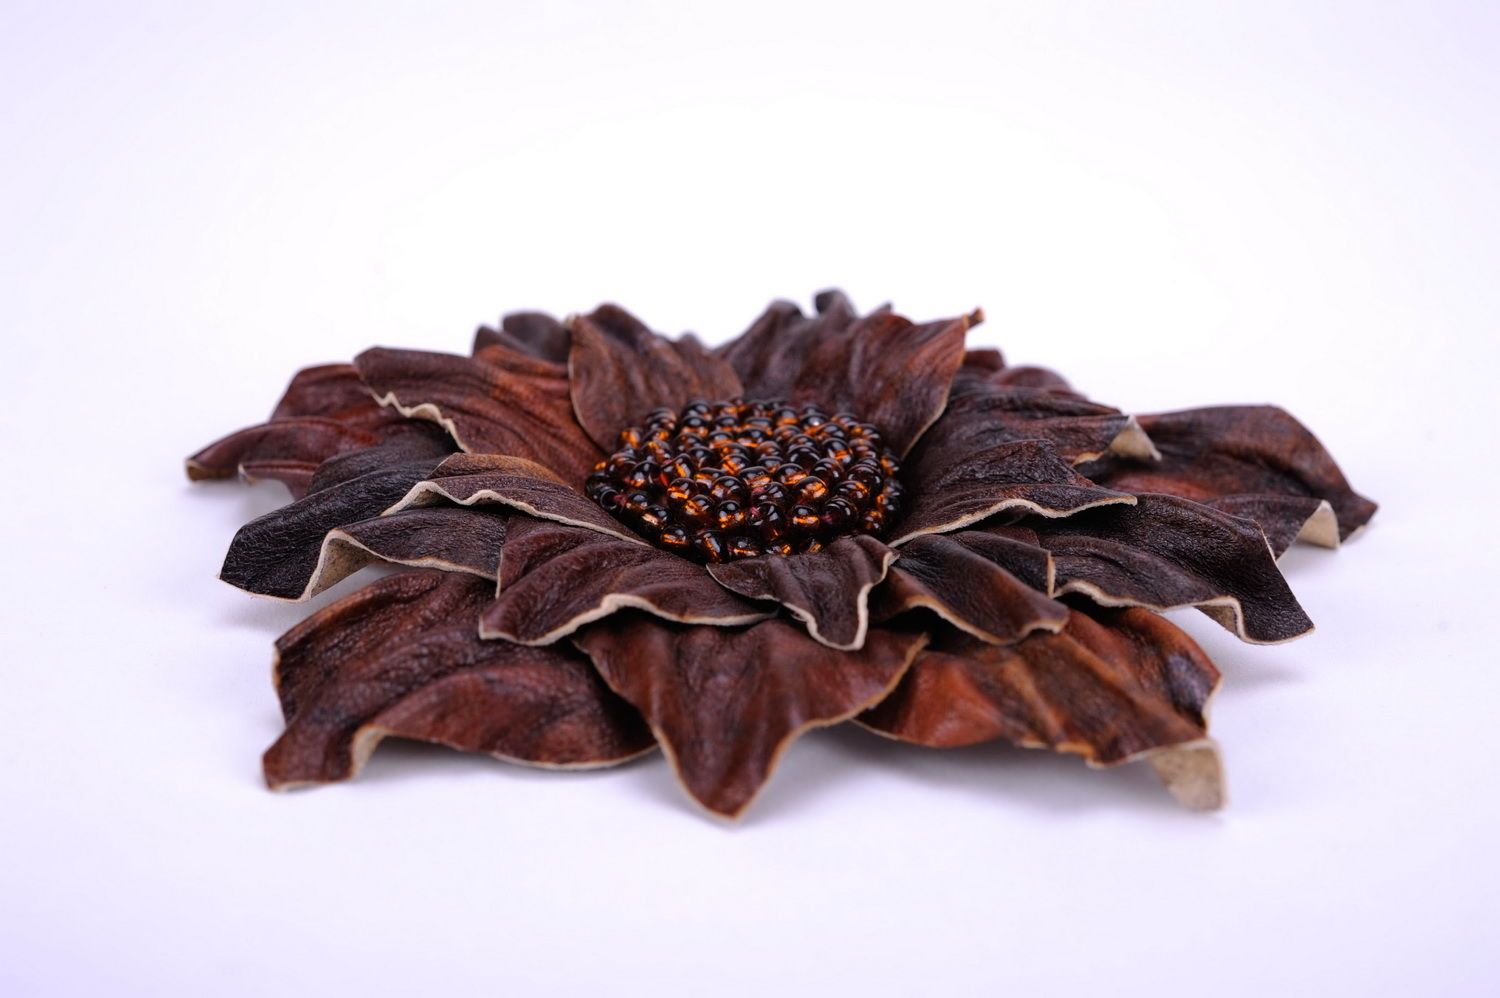 Leather flower brooch photo 3